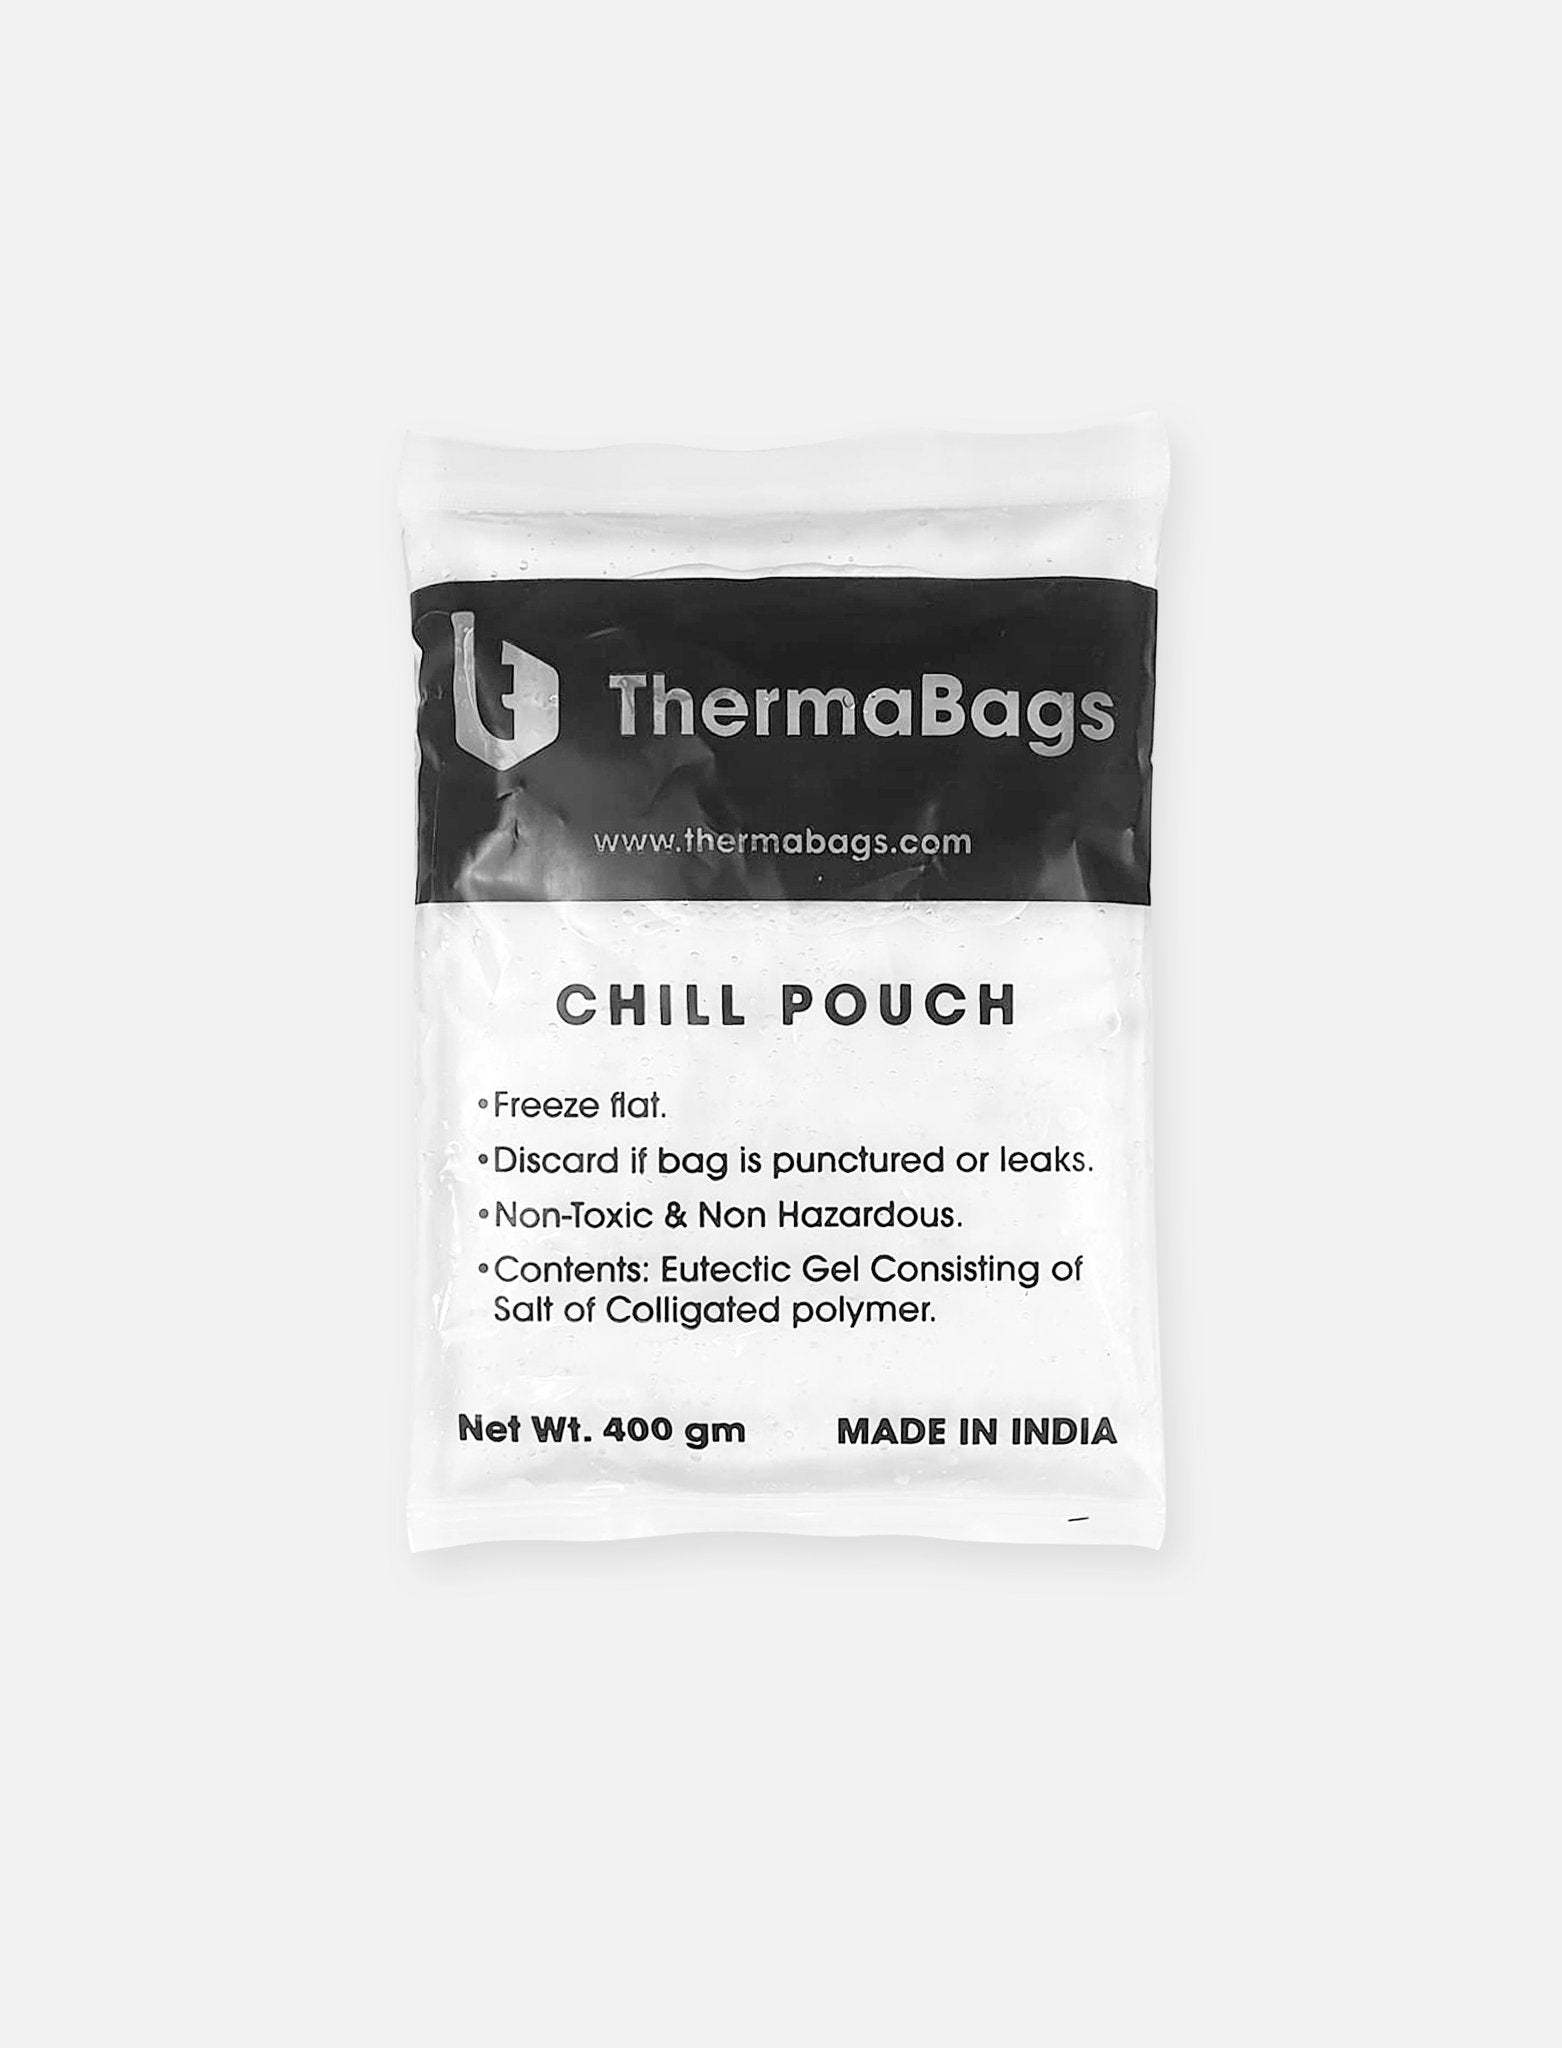 Ice Pack - thermabags